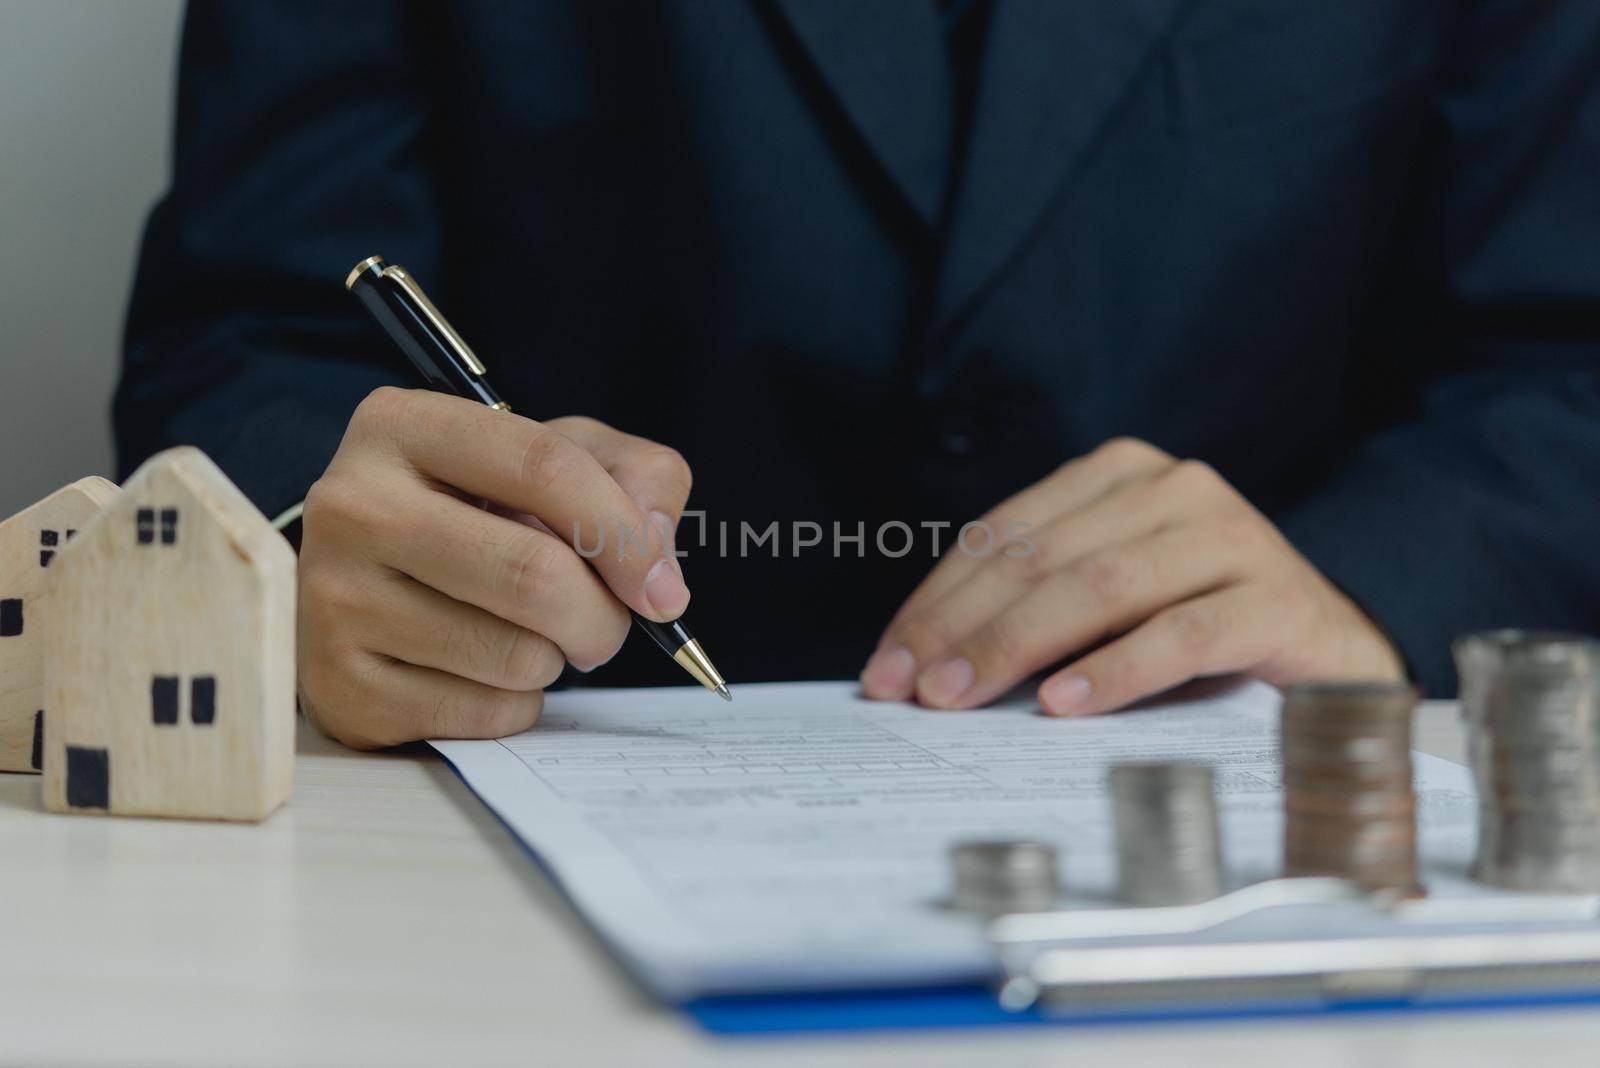 Sign the house approval document. Real estate appraisal, buy and sell houses, business concept finance.businessman holding pen and signing documents at desk by aoo3771